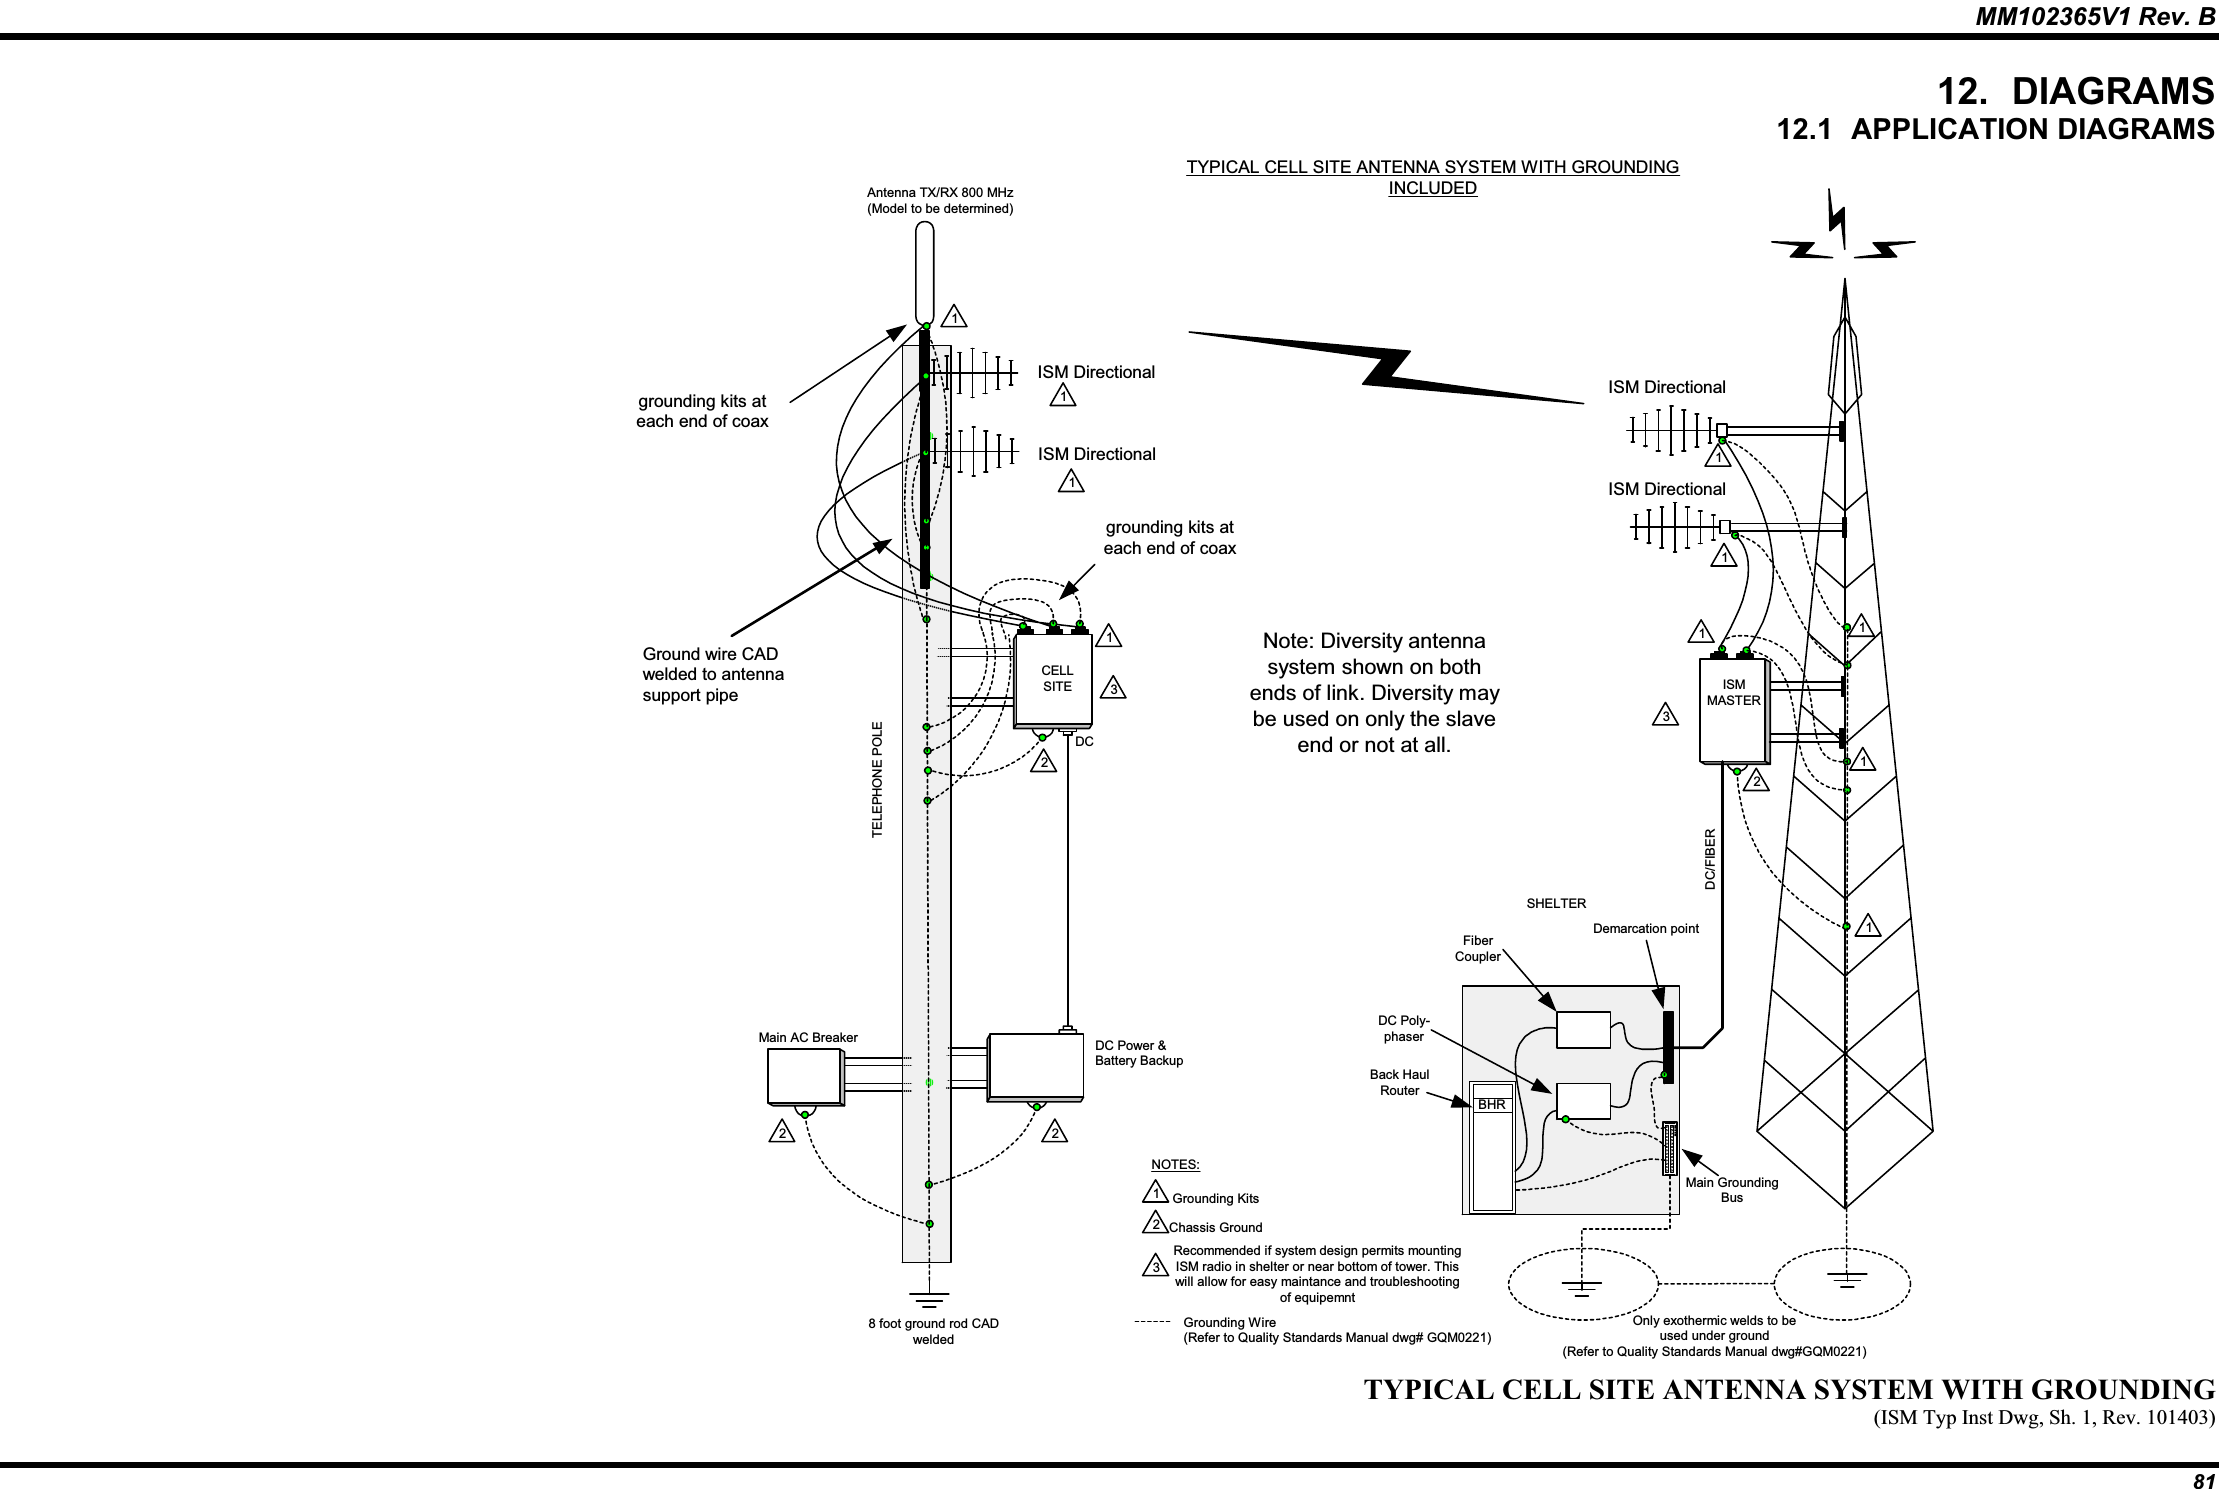 MM102365V1 Rev. B 12. DIAGRAMS 12.1 APPLICATION DIAGRAMSGrounding Wire(Refer to Quality Standards Manual dwg# GQM0221)1Main AC BreakerAntenna TX/RX 800 MHz(Model to be determined)TELEPHONE POLEDC2NOTES:1Grounding KitsSHELTERgrounding kits ateach end of coaxDC Power &amp;Battery BackupISM DirectionalISM DirectionalISMMASTERISM DirectionalISM DirectionalDC/FIBERDemarcation pointBHRBack HaulRouterMain GroundingBusDC Poly-phaserFiberCoupler2Chassis Ground222111113Recommended if system design permits mountingISM radio in shelter or near bottom of tower. Thiswill allow for easy maintance and troubleshootingof equipemnt1133CELLSITE1Only exothermic welds to beused under ground(Refer to Quality Standards Manual dwg#GQM0221)TYPICAL CELL SITE ANTENNA SYSTEM WITH GROUNDINGINCLUDED31Note: Diversity antennasystem shown on bothends of link. Diversity maybe used on only the slaveend or not at all.grounding kits ateach end of coaxGround wire CADwelded to antennasupport pipe8 foot ground rod CADweldedTYPICAL CELL SITE ANTENNA SYSTEM WITH GROUNDING(ISM Typ Inst Dwg, Sh. 1, Rev. 101403)81